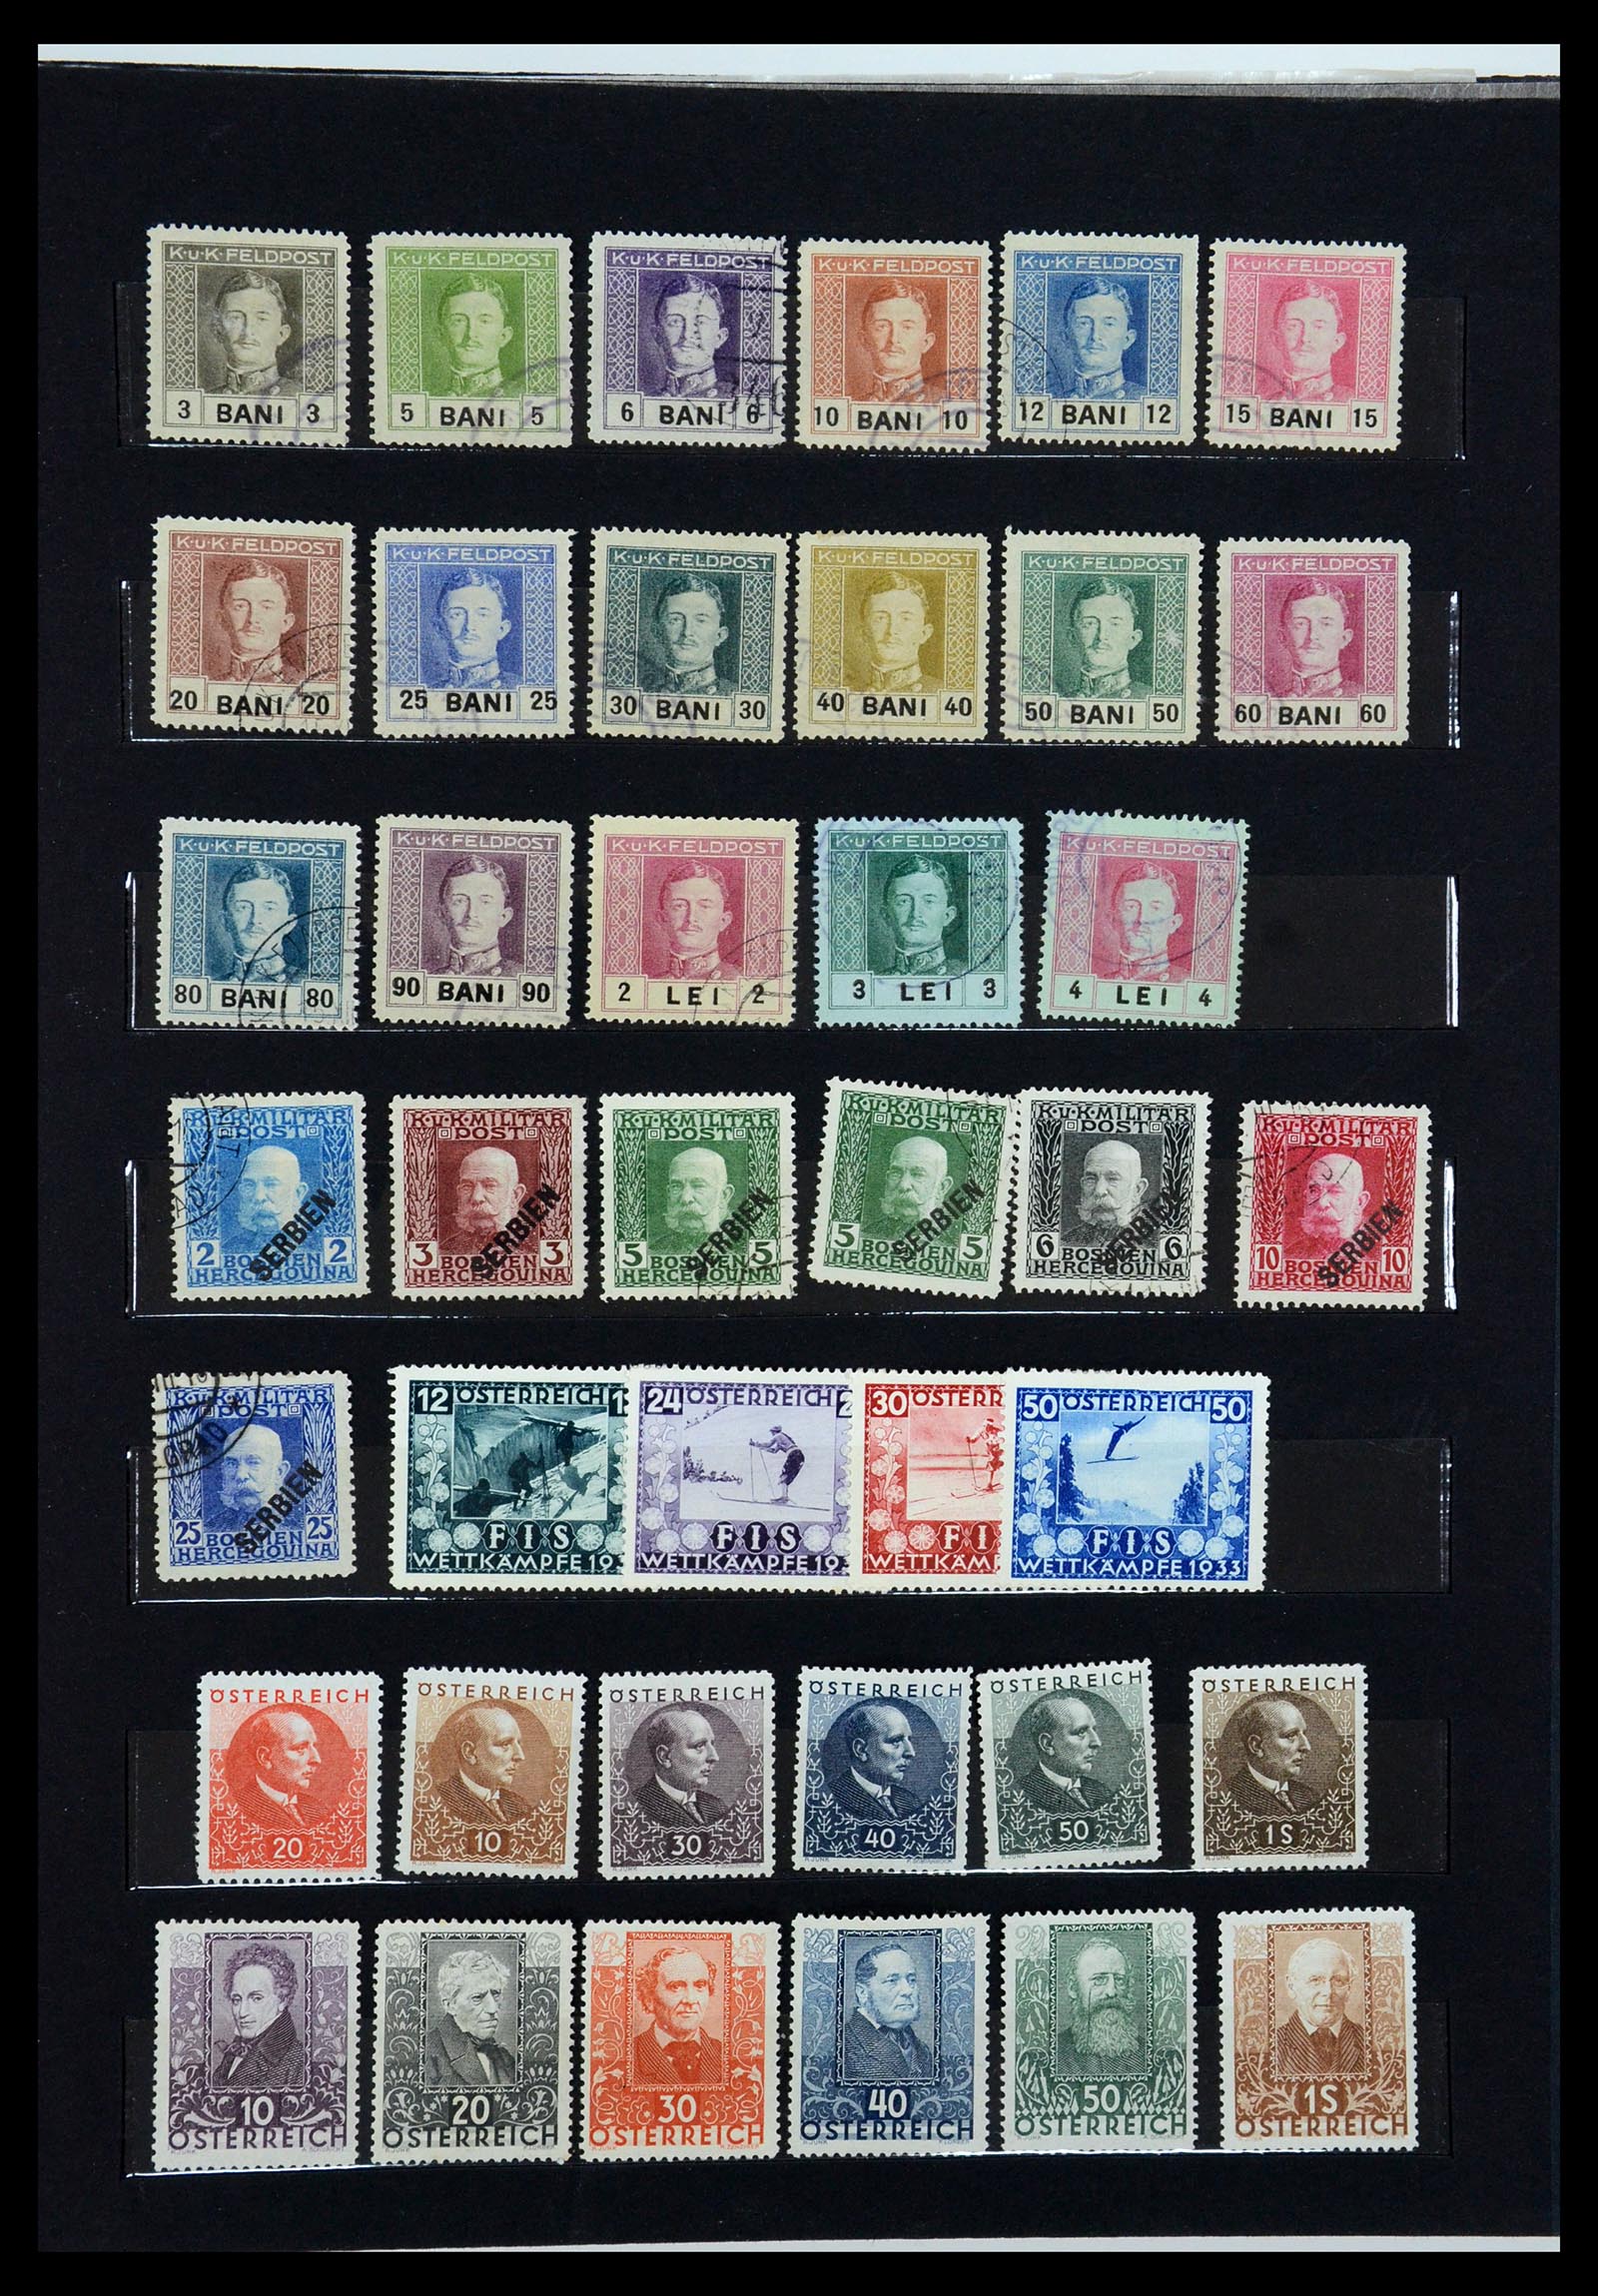 36002 012 - Stamp collection 36002 Austria and territories 1858-1958.